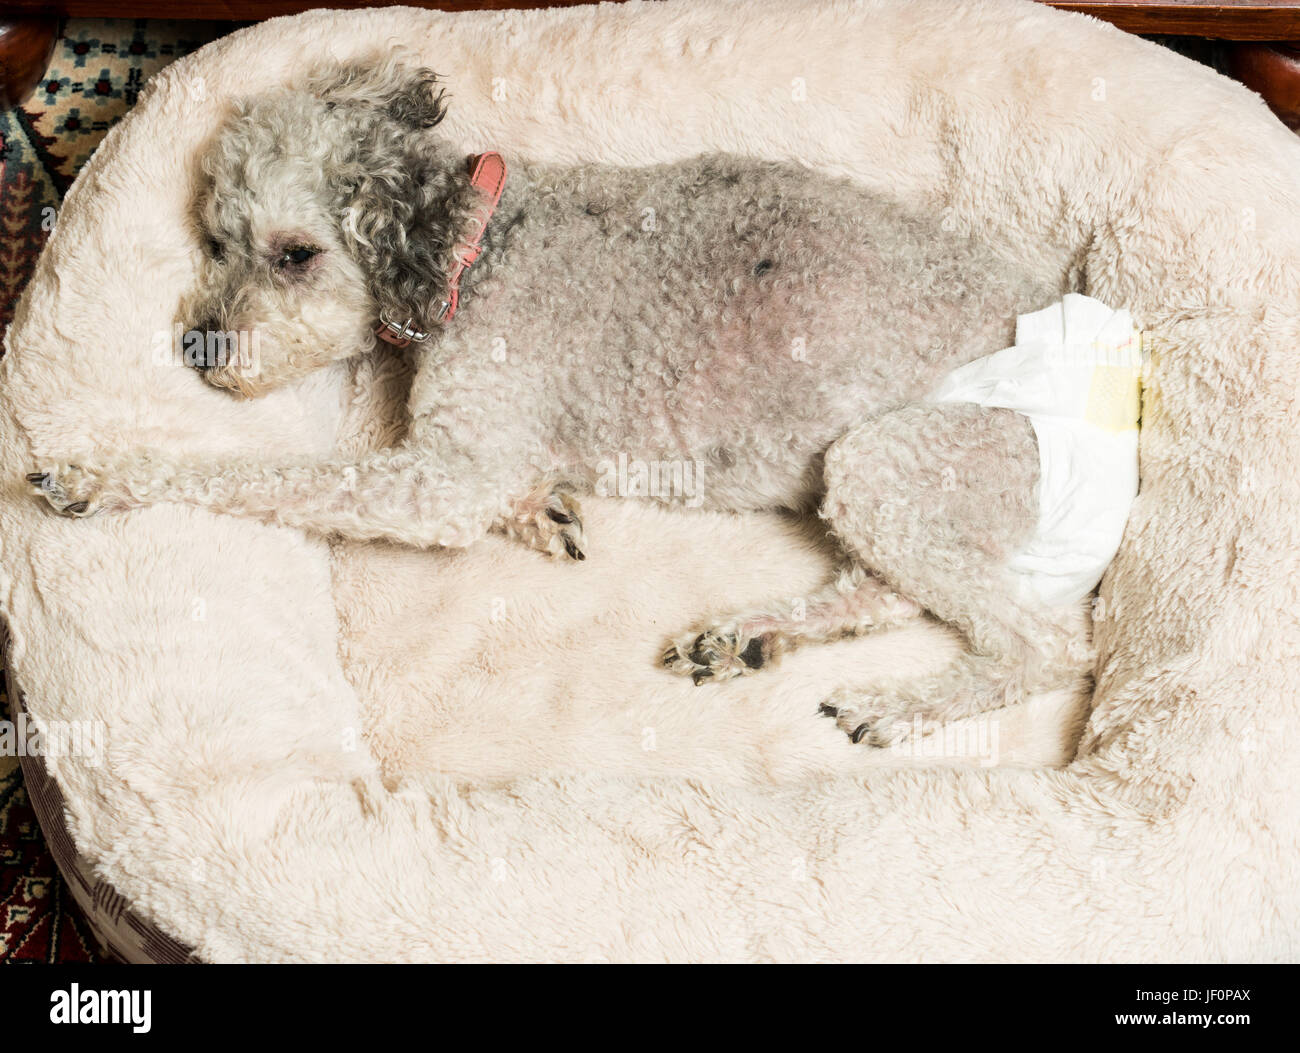 Old grey dog wearing a doggy diaper Stock Photo